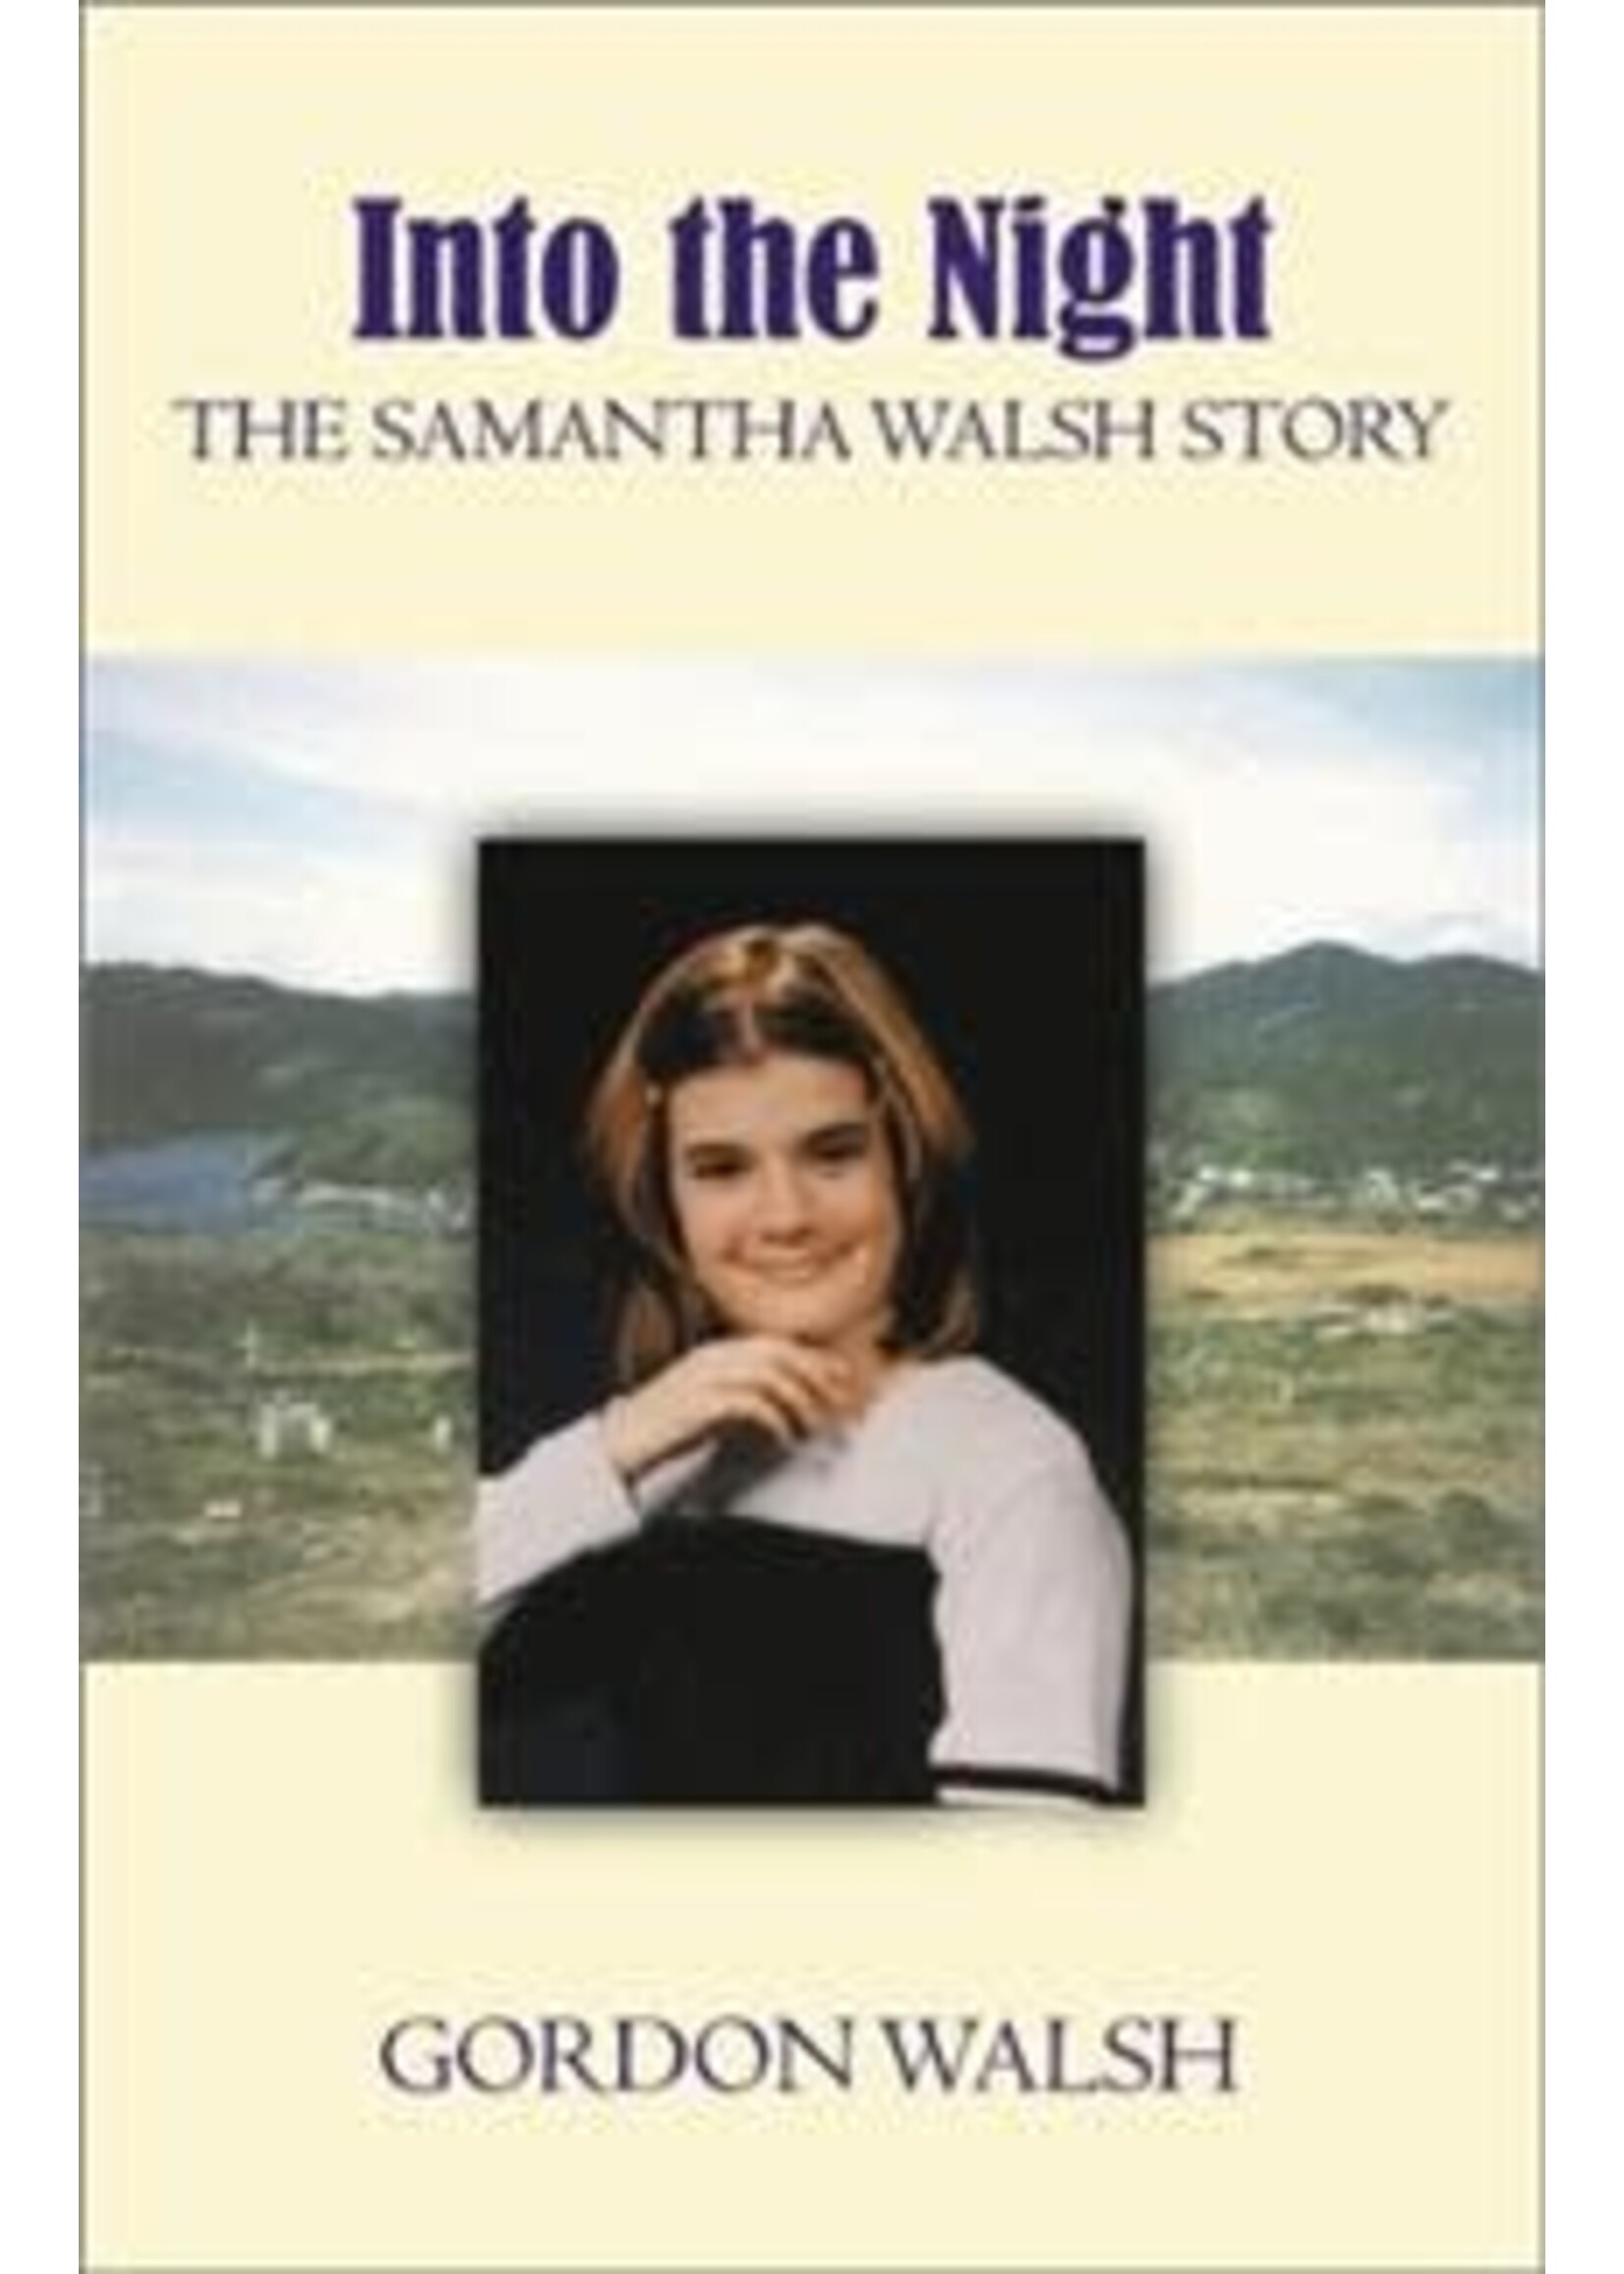 Into the Night: The Samantha Walsh Story by Gordon Walsh